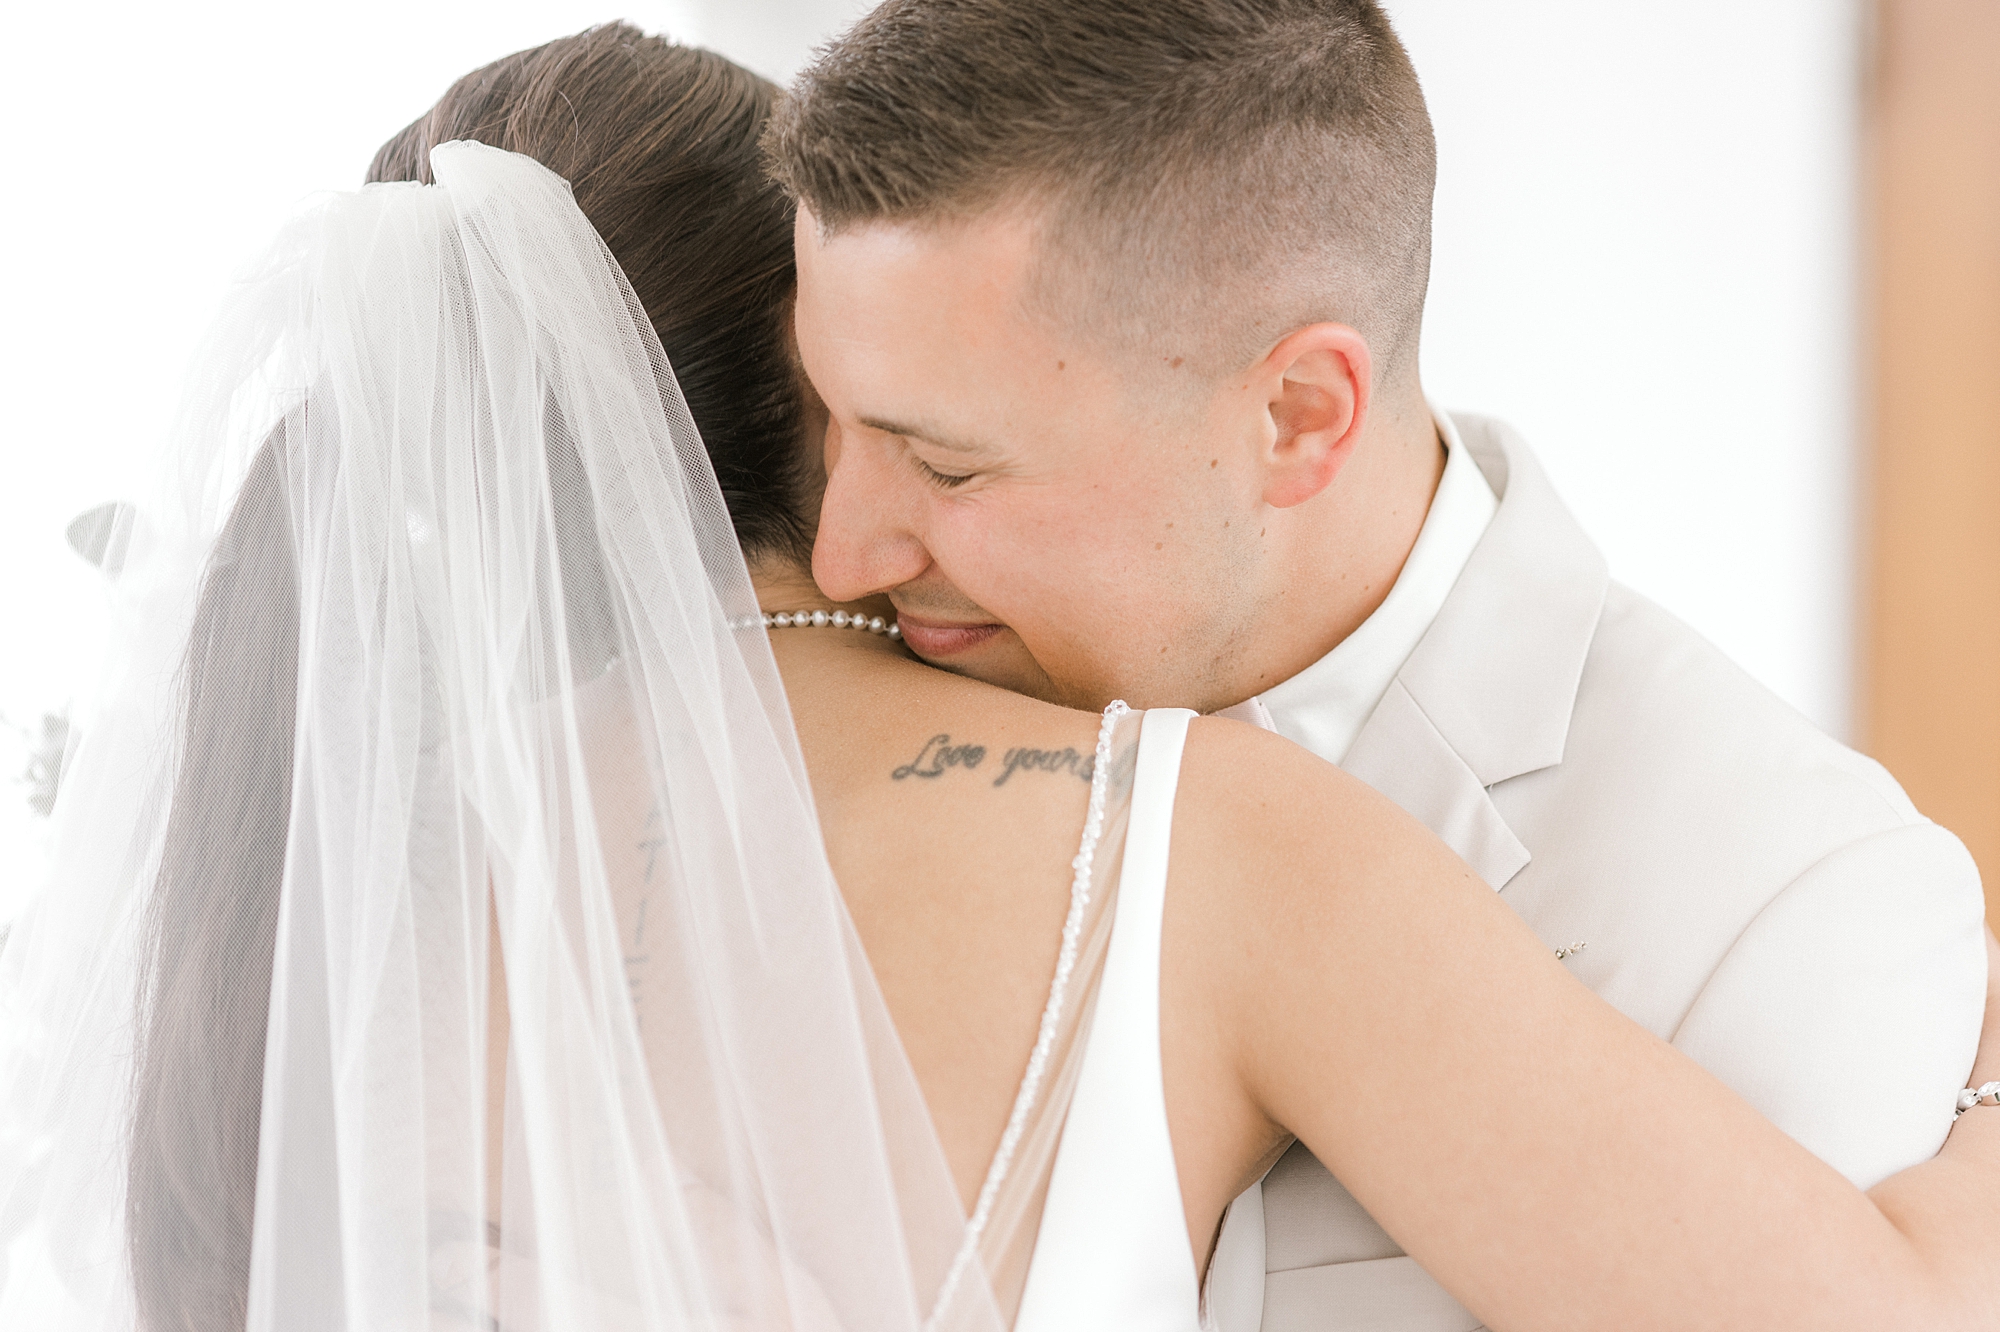 groom nuzzles bride's neck holding her during first look